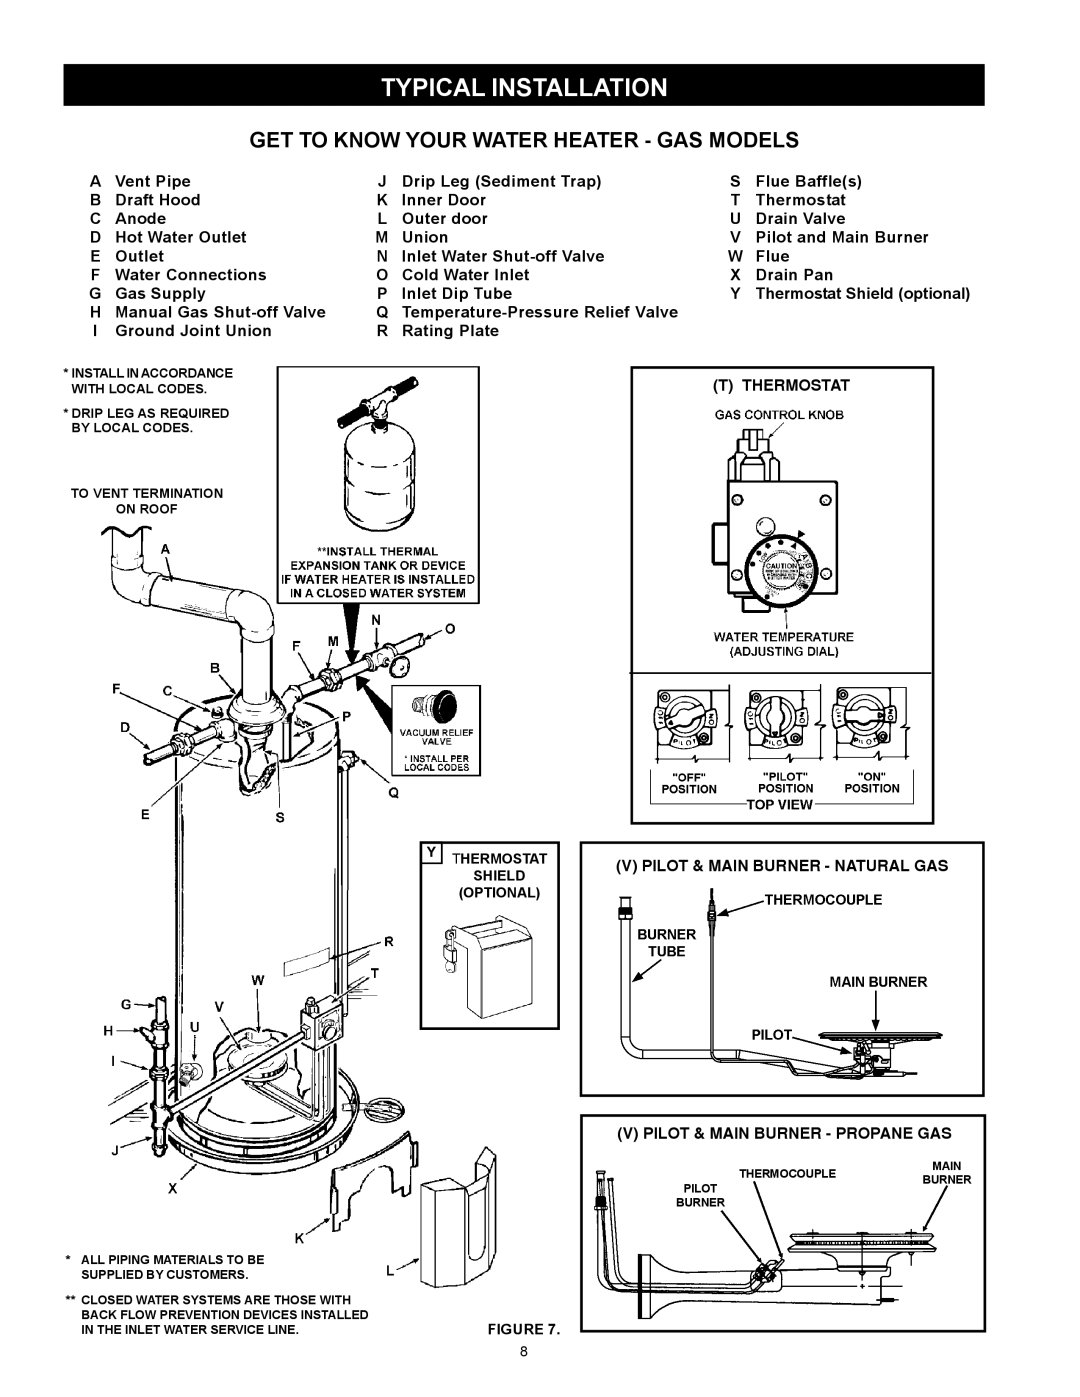 Maytag HXN4975S manual Typical Installation, Get To Know Your Water Heater - Gas Models 